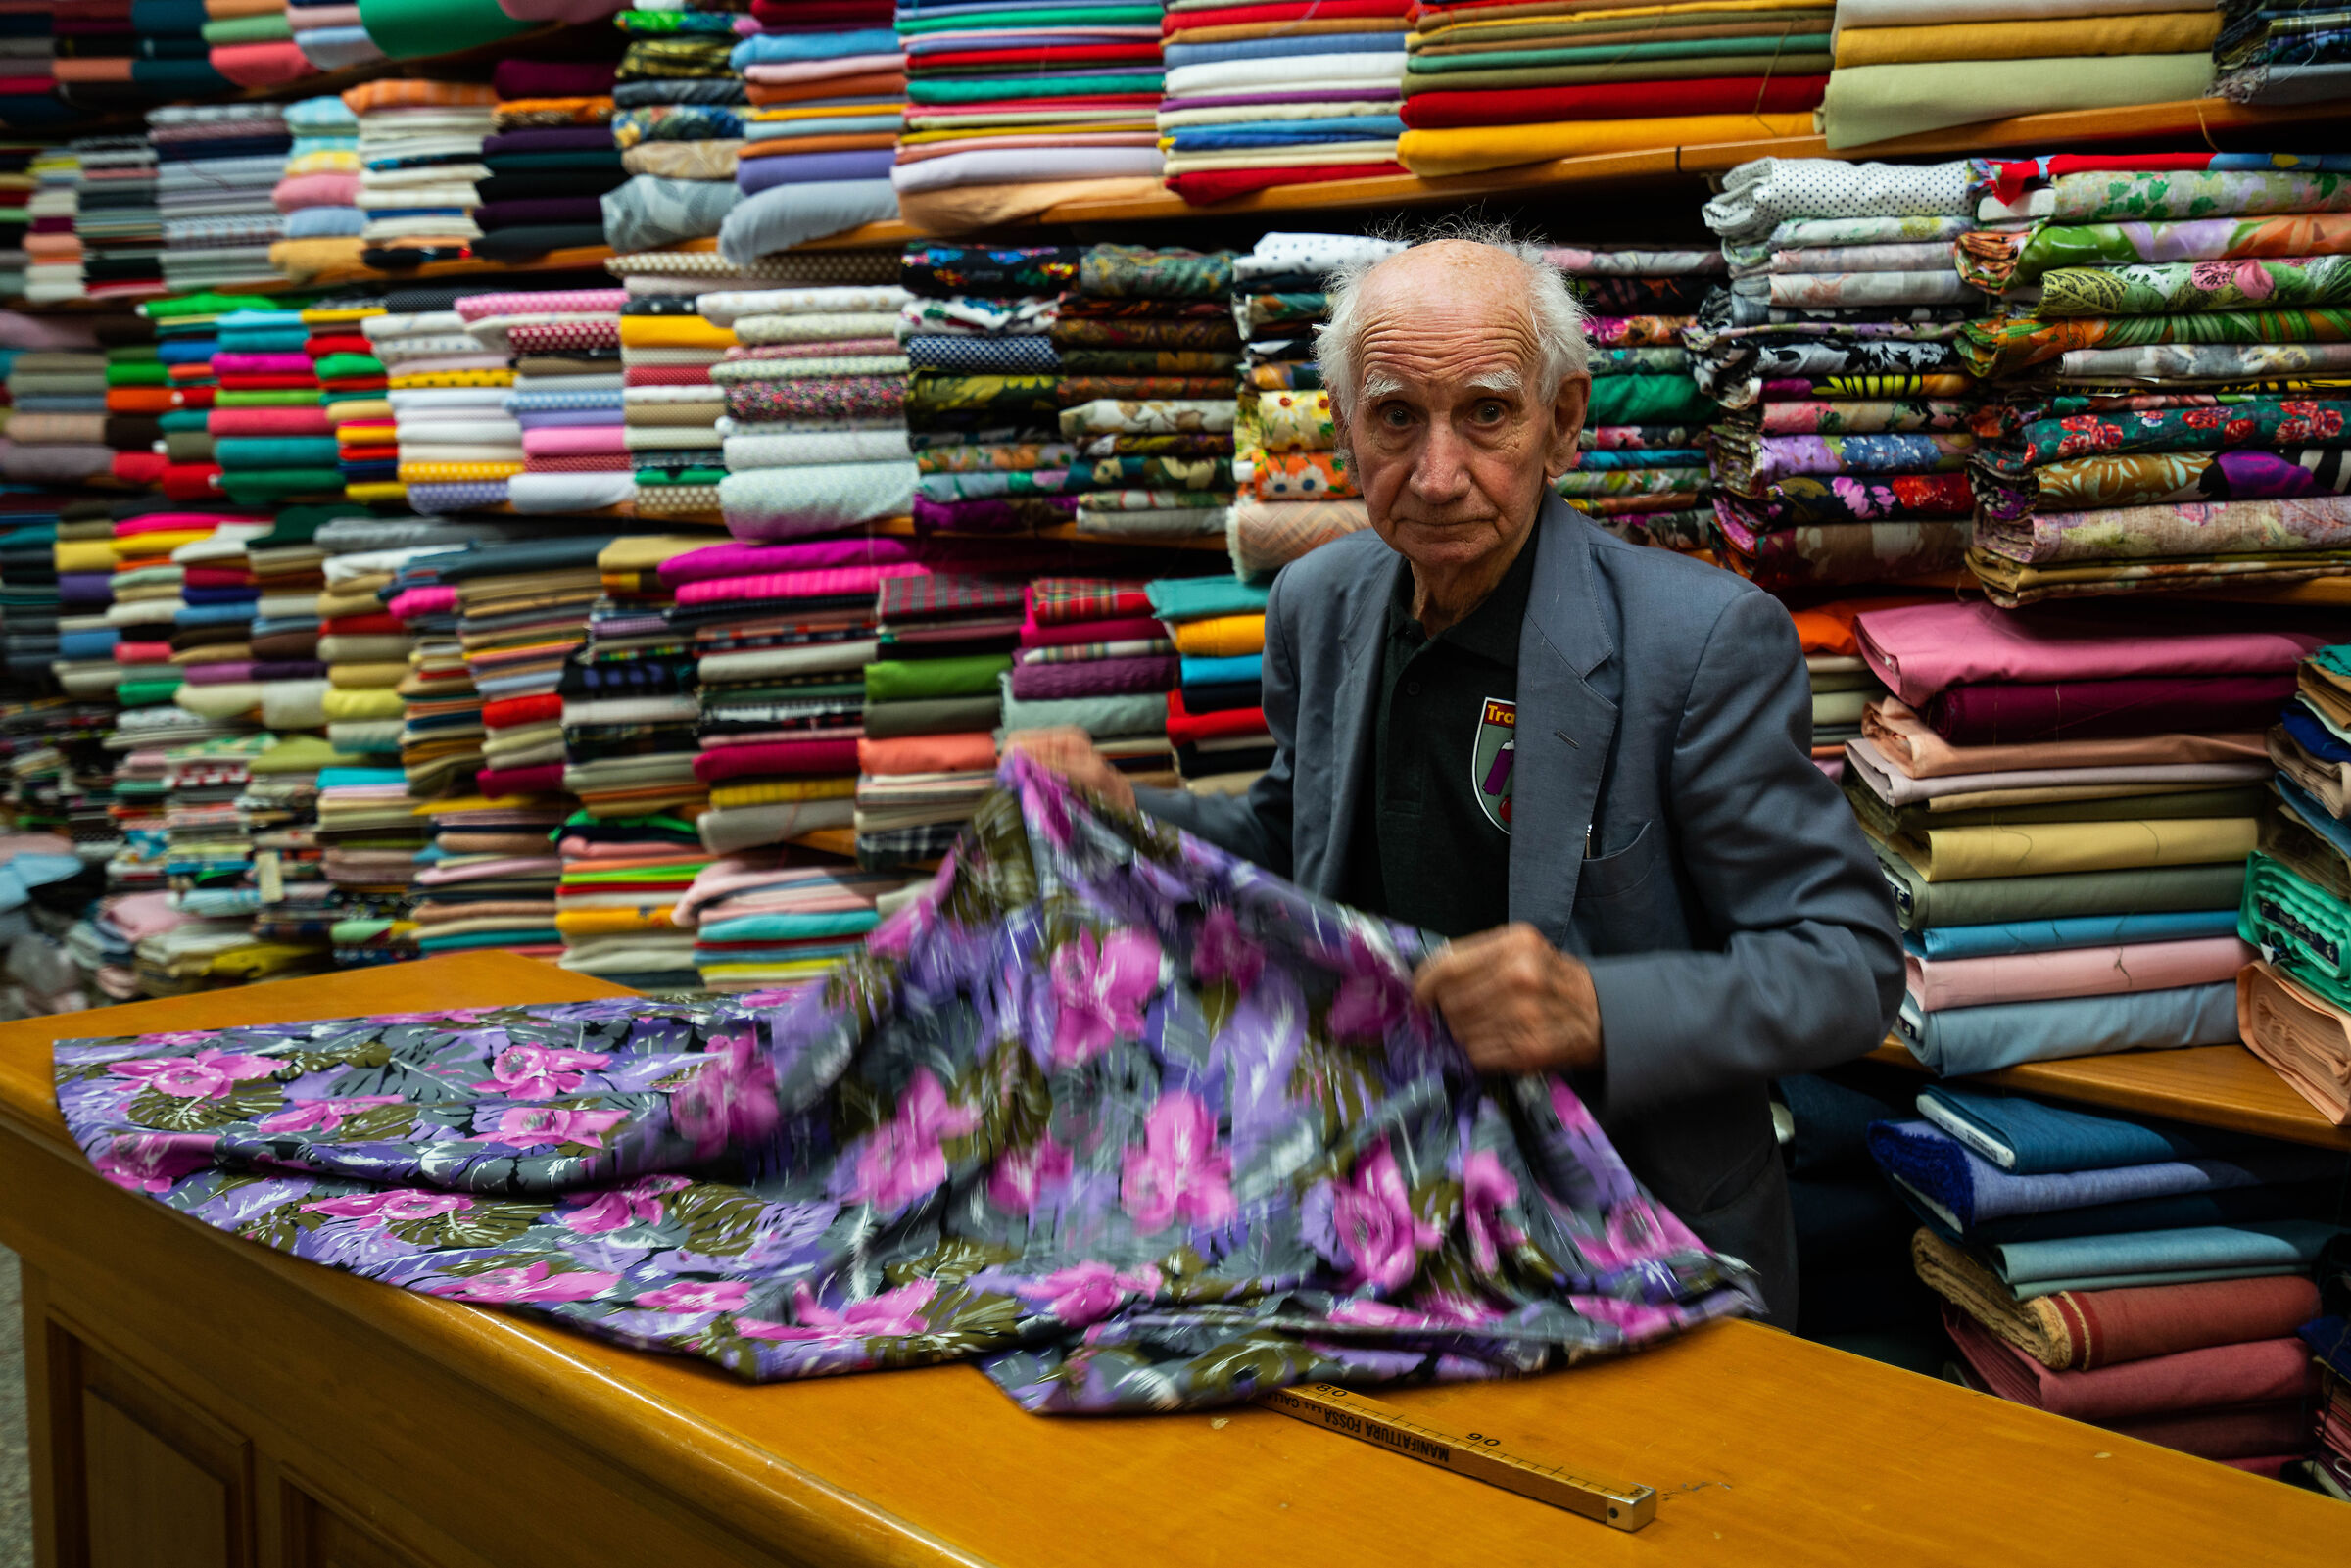 Oldest shopkeeper in Italy, 99 years old, in business...